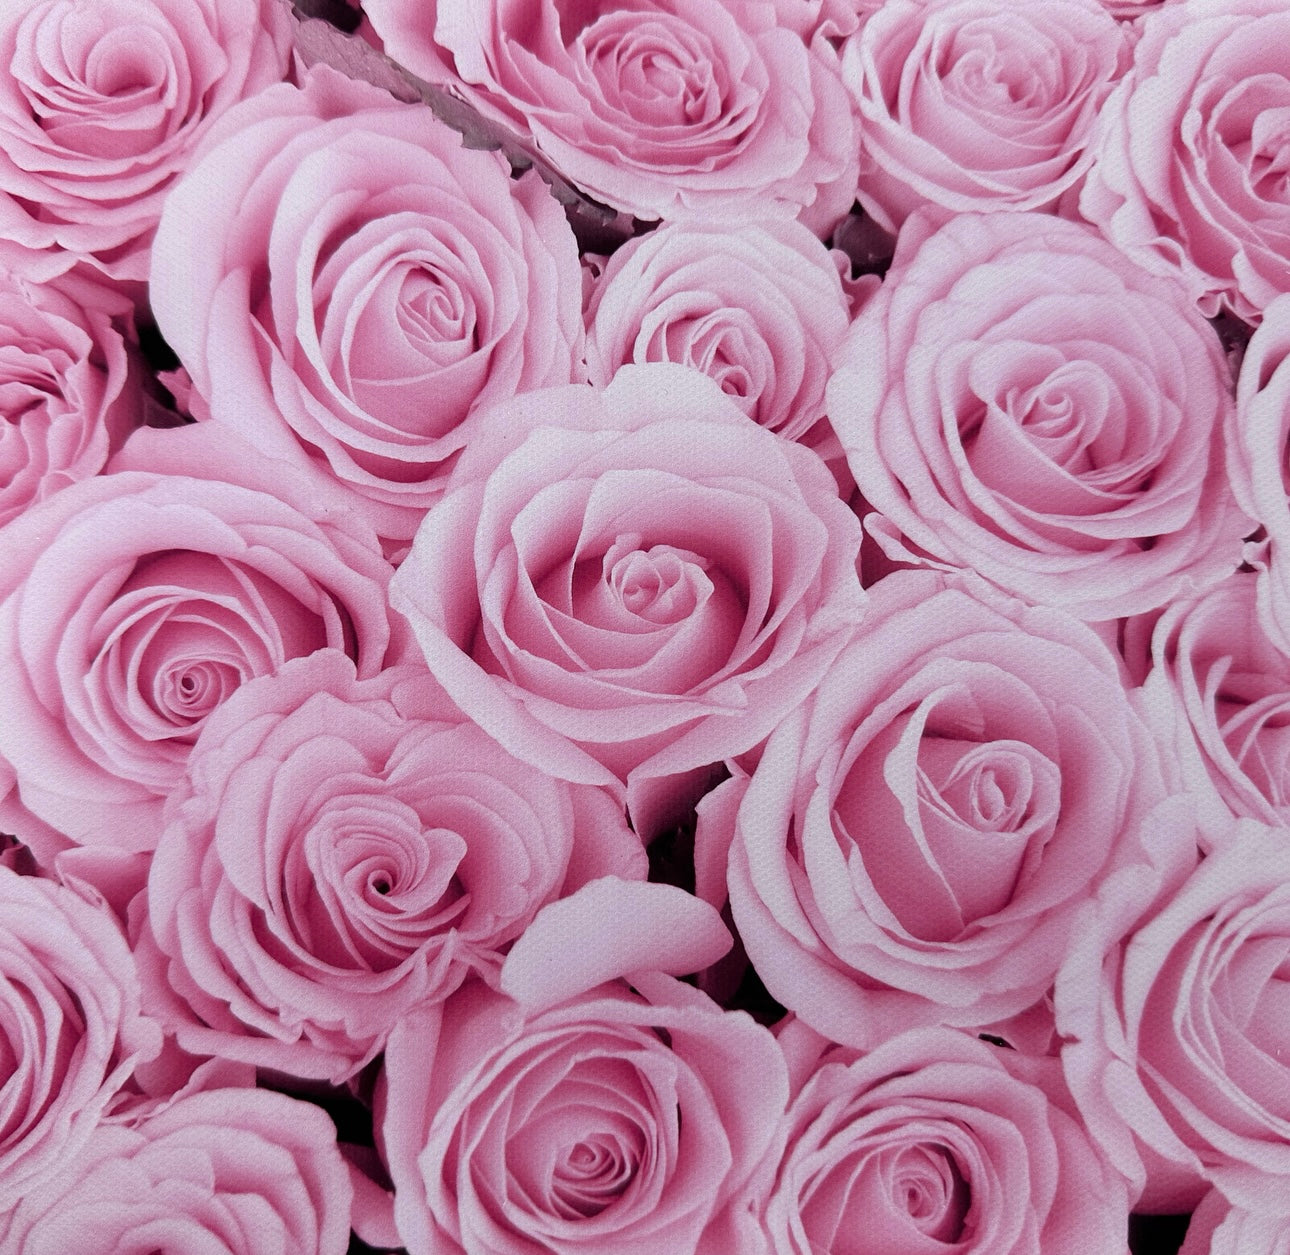 Soft Pink Roses Flower Wall Effect Canvas Photography Background